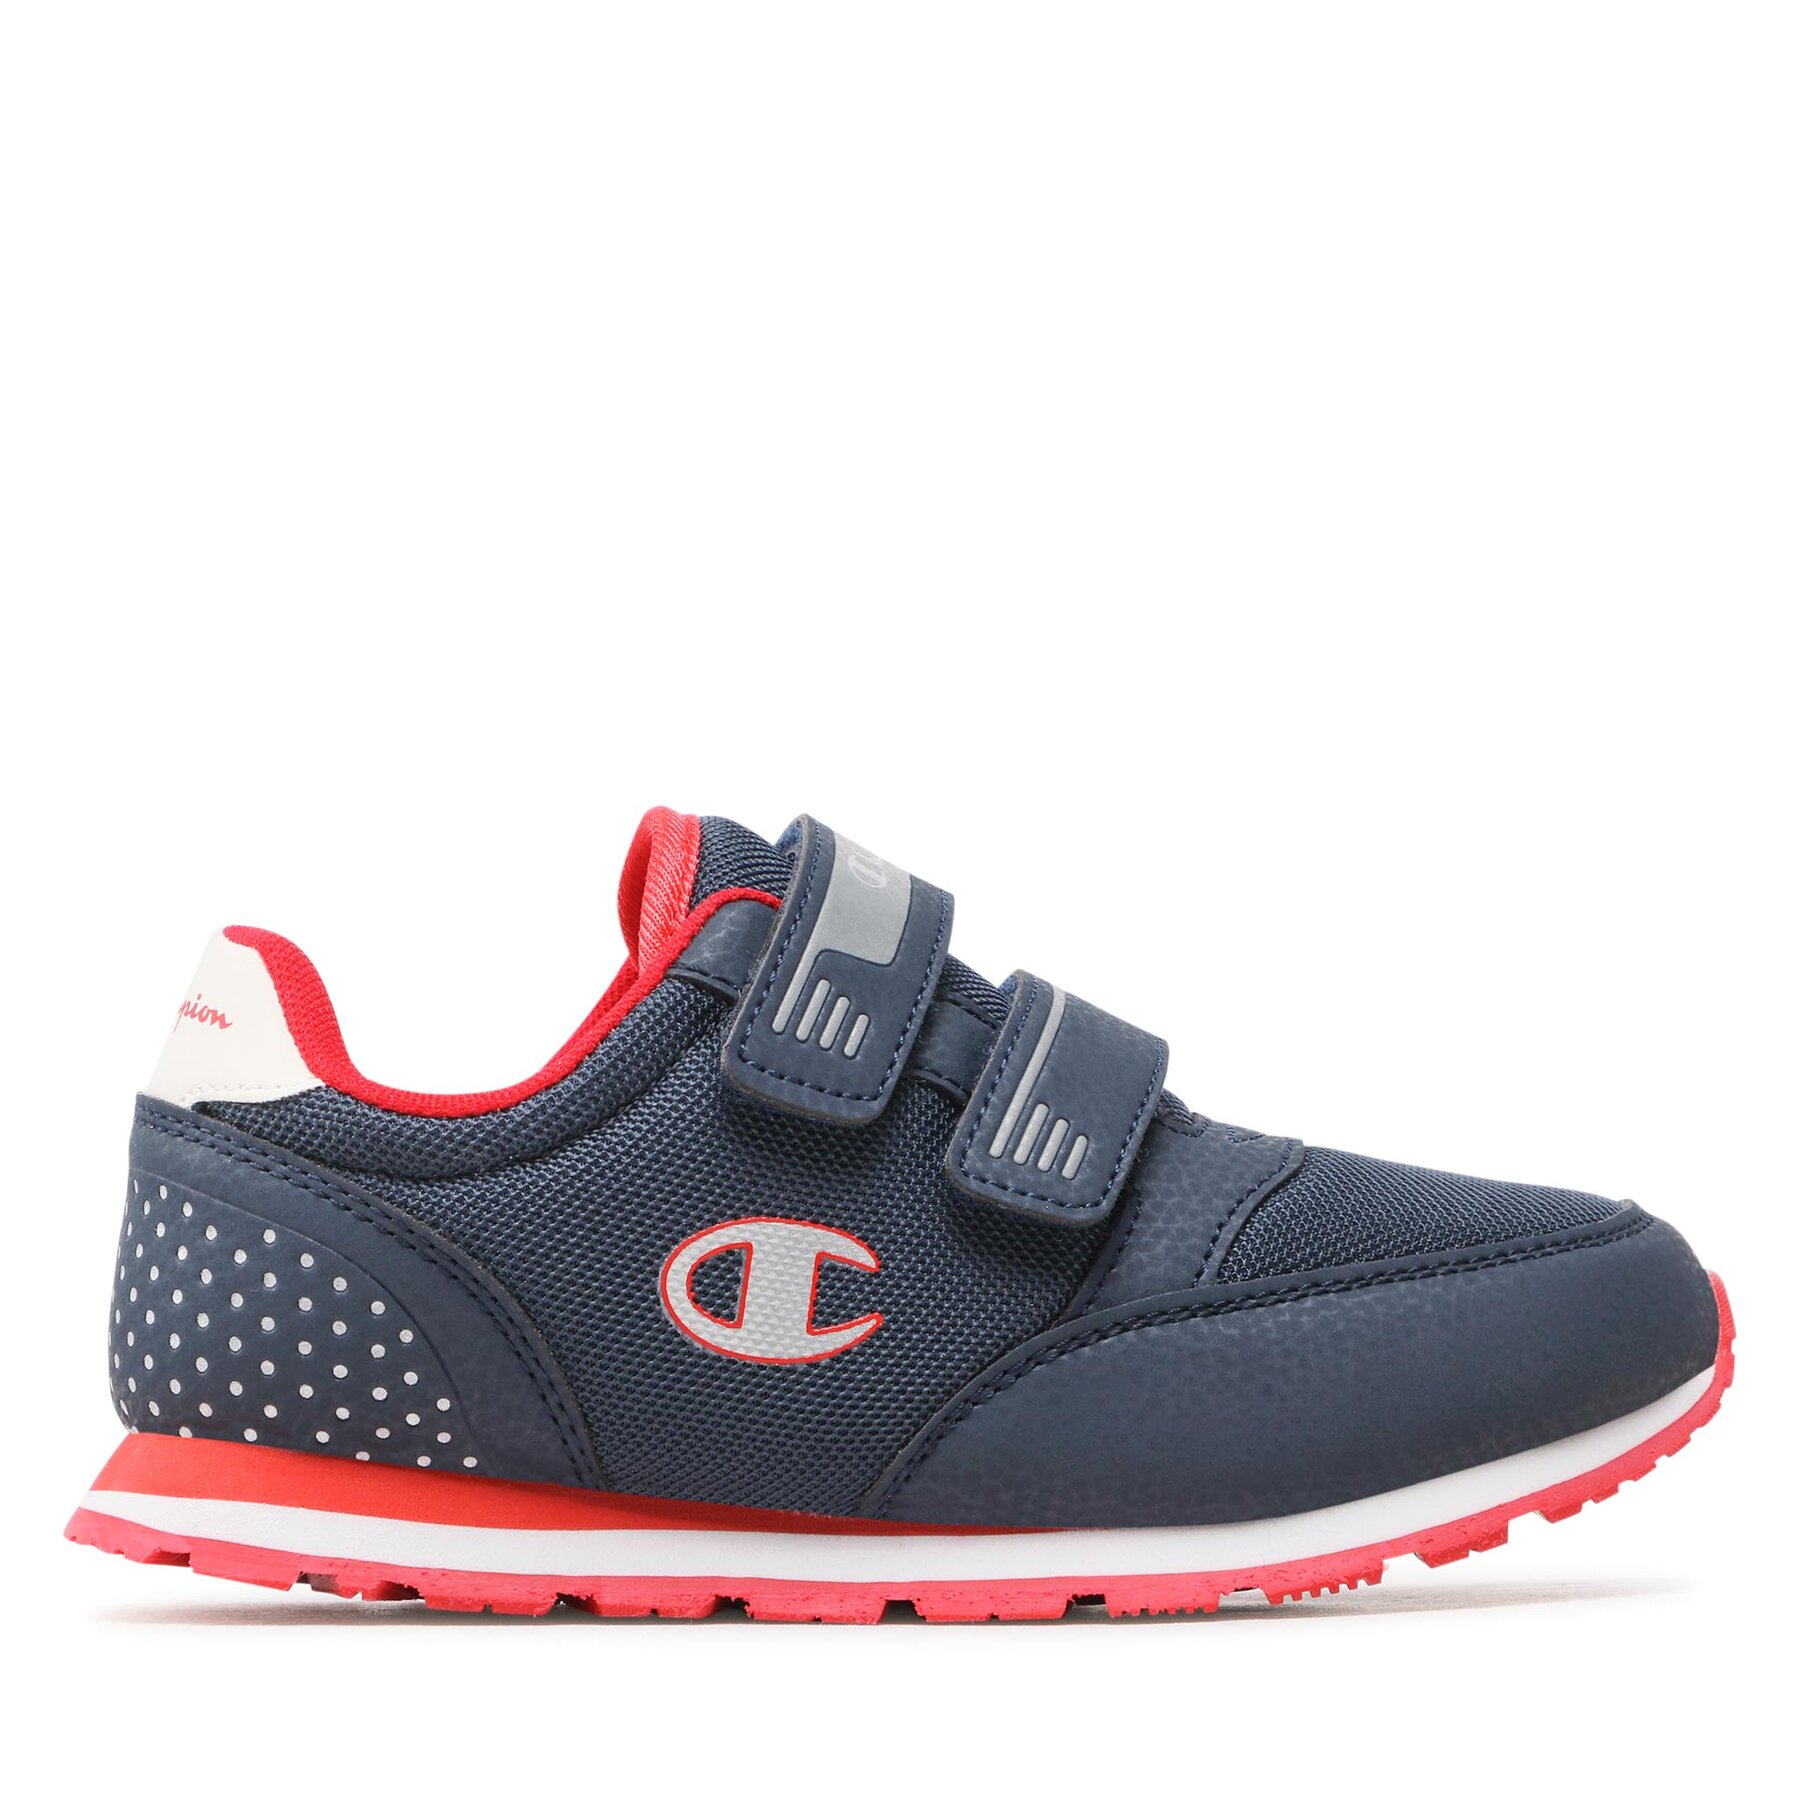 Sneakers Champion Champ Evolve M S32618-CHA-BS501 Nny/Red von Champion